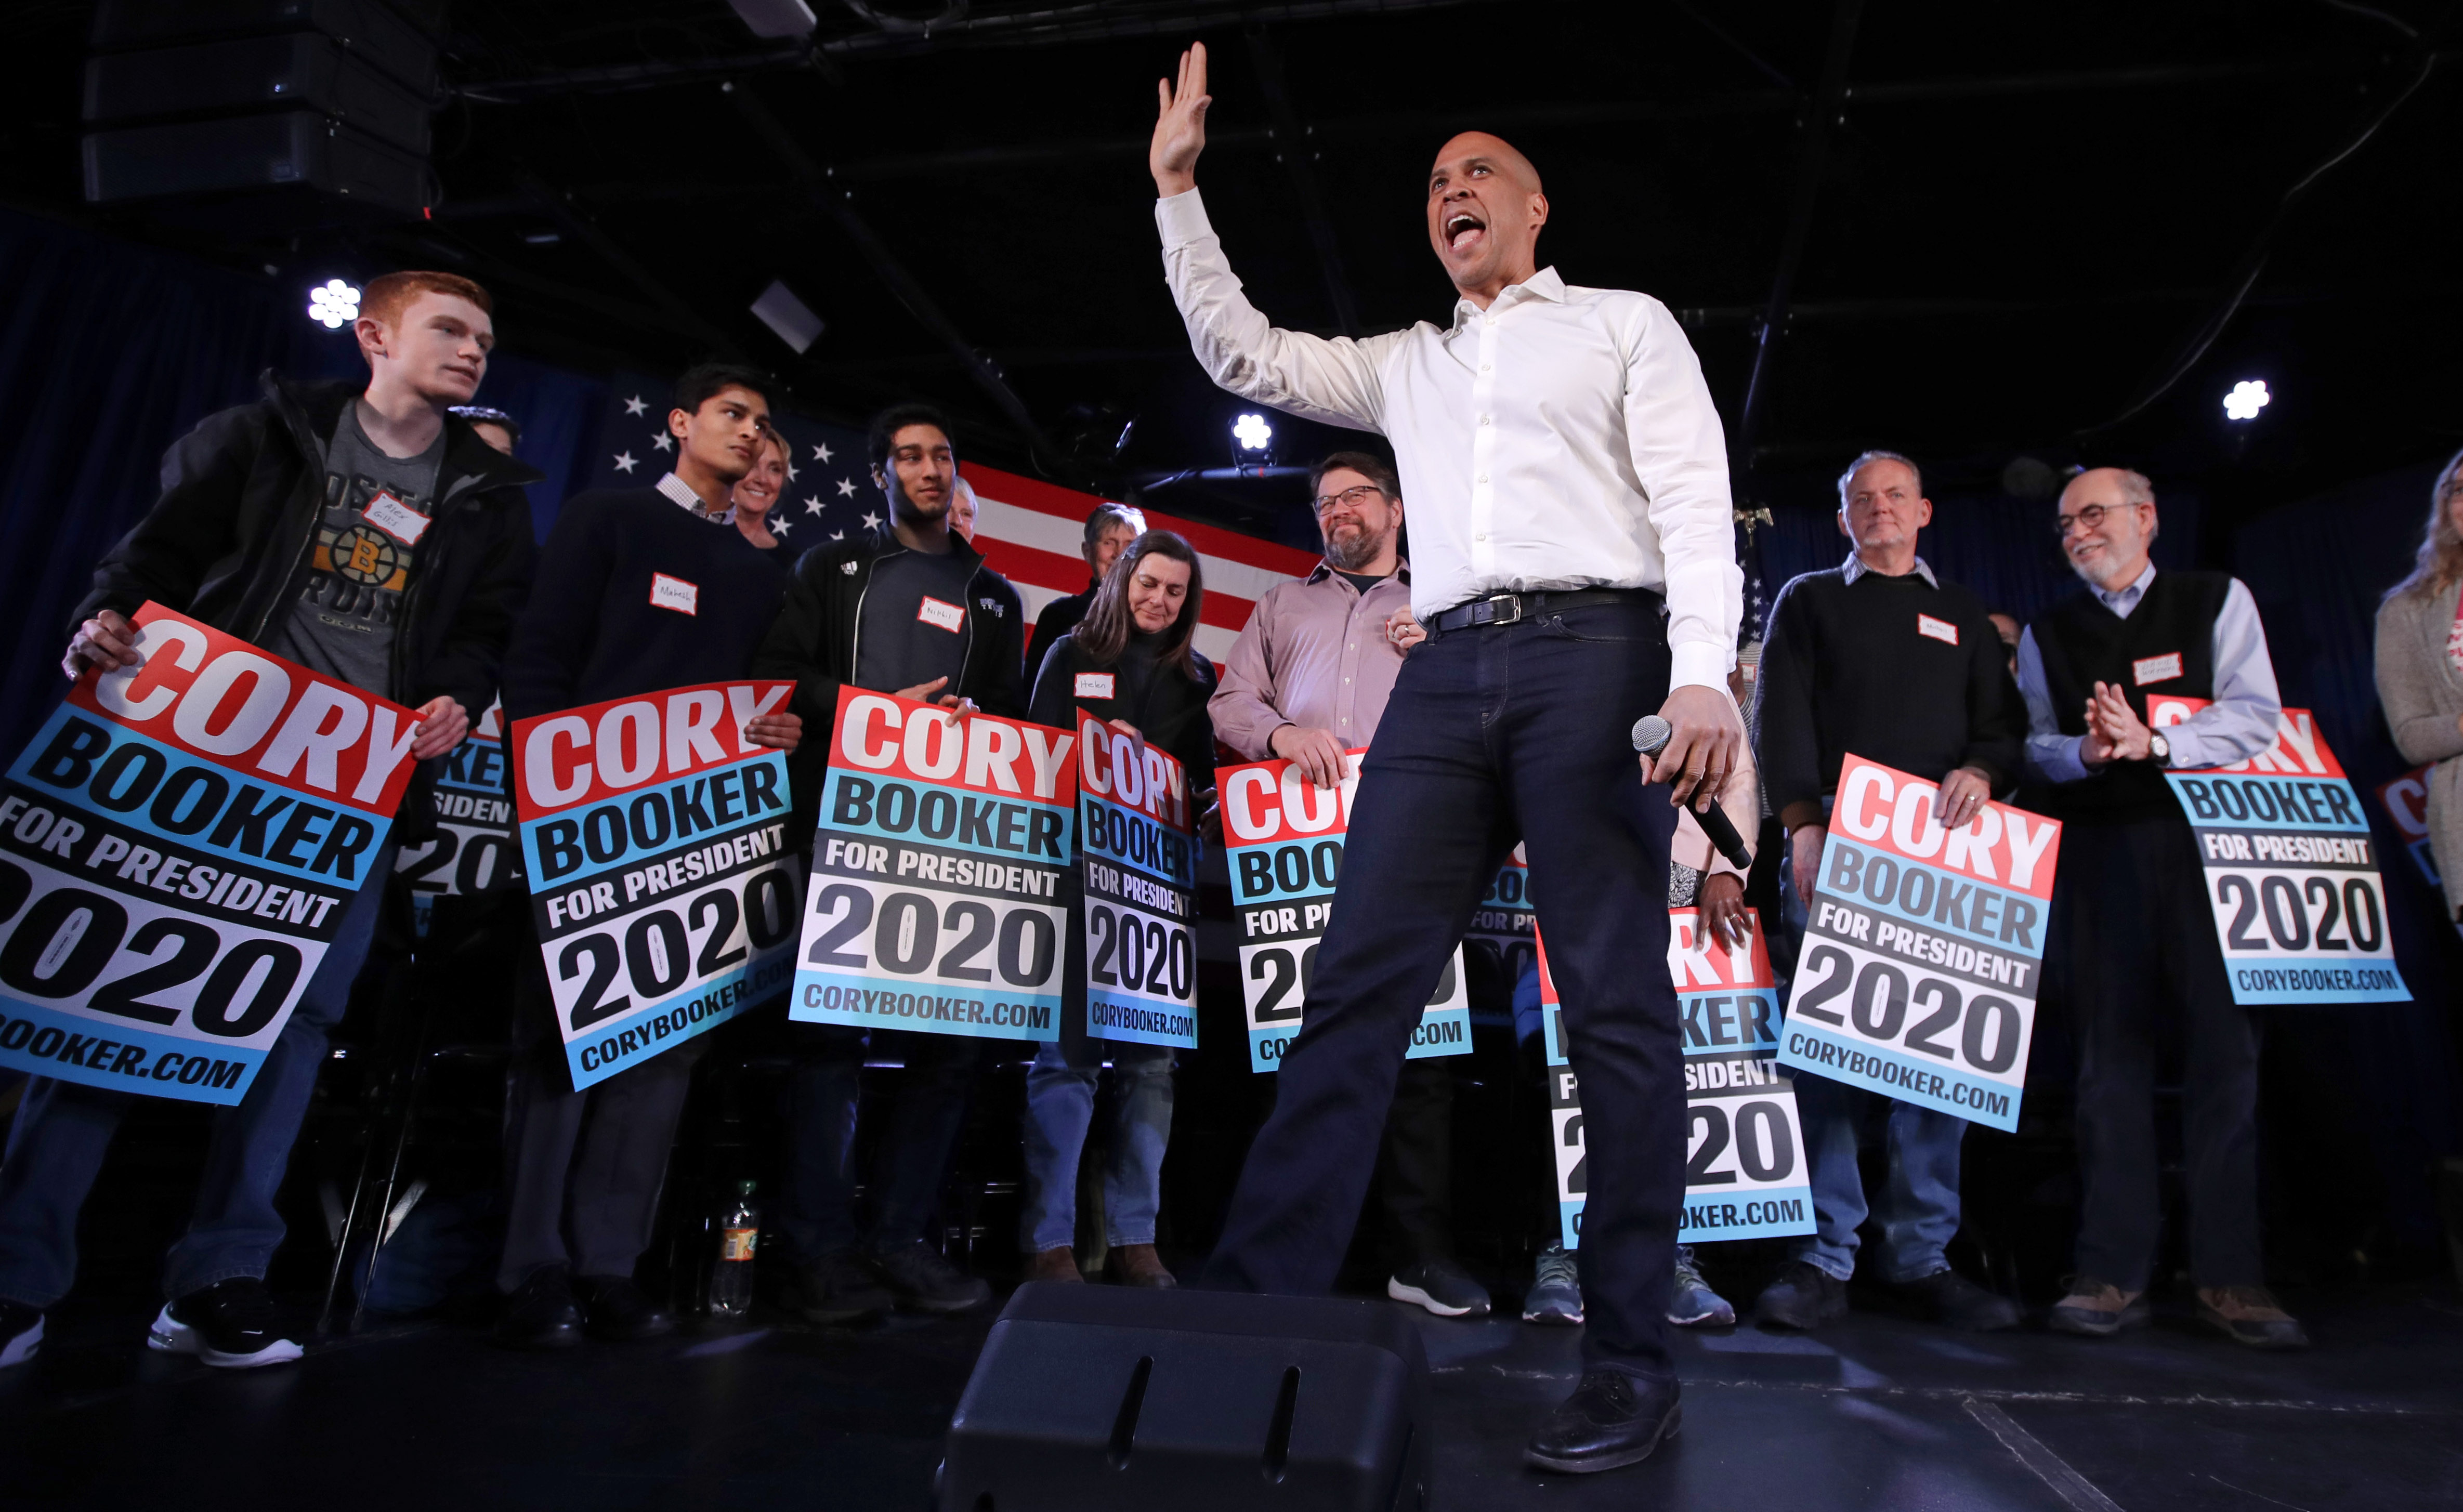 Cory Booker during a campaign stop in Portsmouth, New Hampshire